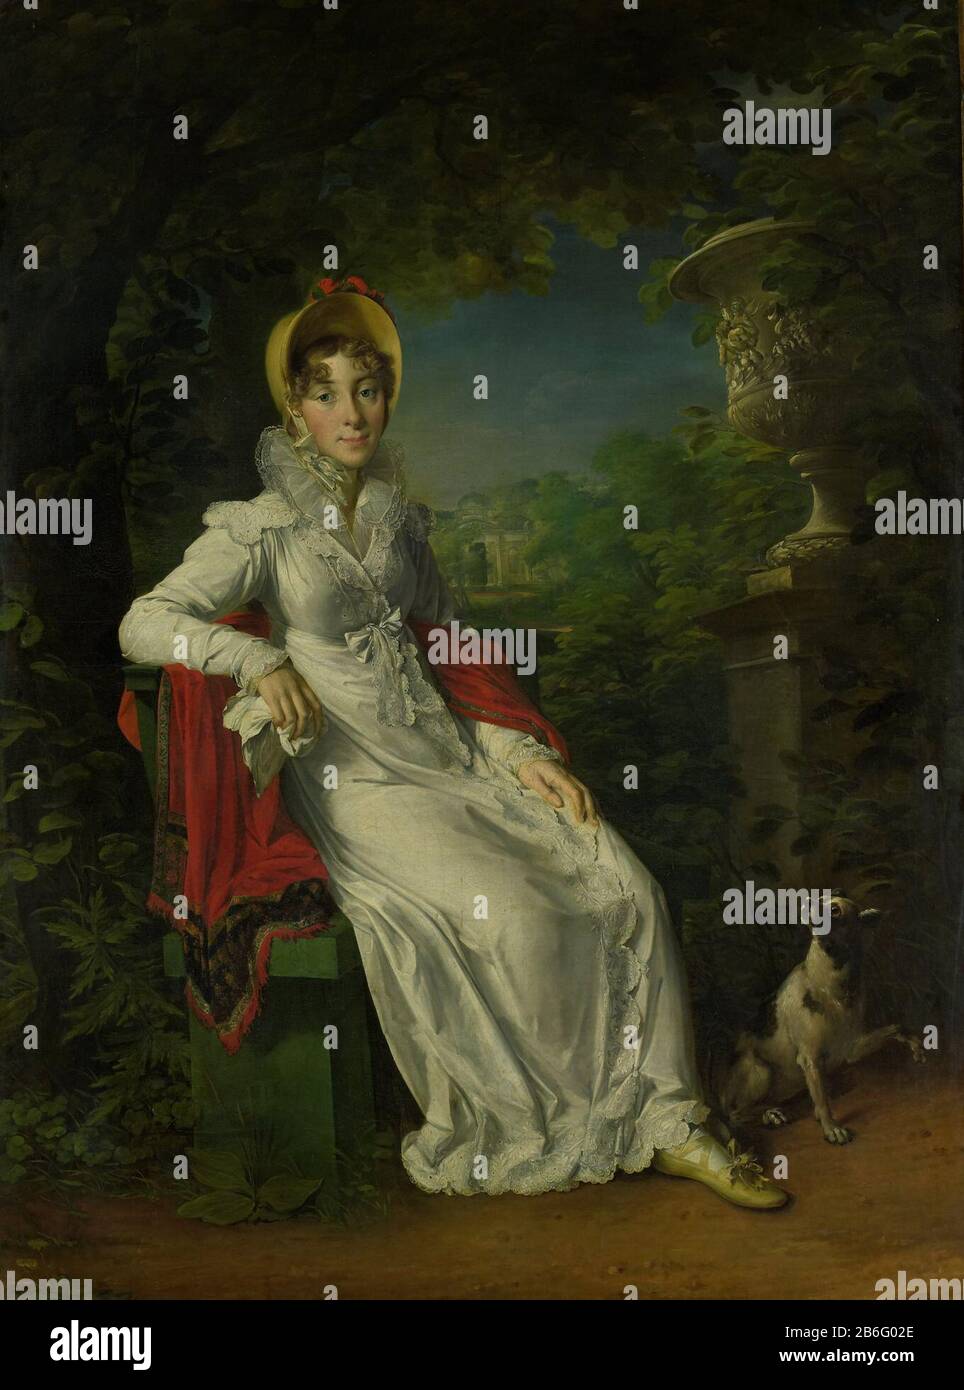 Portrait of the Duchess of Berry, Carolina Ferdinanda Louisa Sicily (the eldest daughter of Francis I. king of Naples), wife of Charles Ferdinand, Duke of Berry in the park Bagatelle in the Bois de Boulogne in Paris. Full Length, sitting on a garden bench with a vase. Right at her feet a hondje. Manufacturer : painter François Gérard Dating: 1820 - 1837 Physical characteristics: oil on canvas material: oil canvas Dimensions: support: h 194.5 cm. B × 142.5 cm. outside: d 6.8 cm. (Carrier including SK-L-4015.) Subject Where: Paris Stock Photo